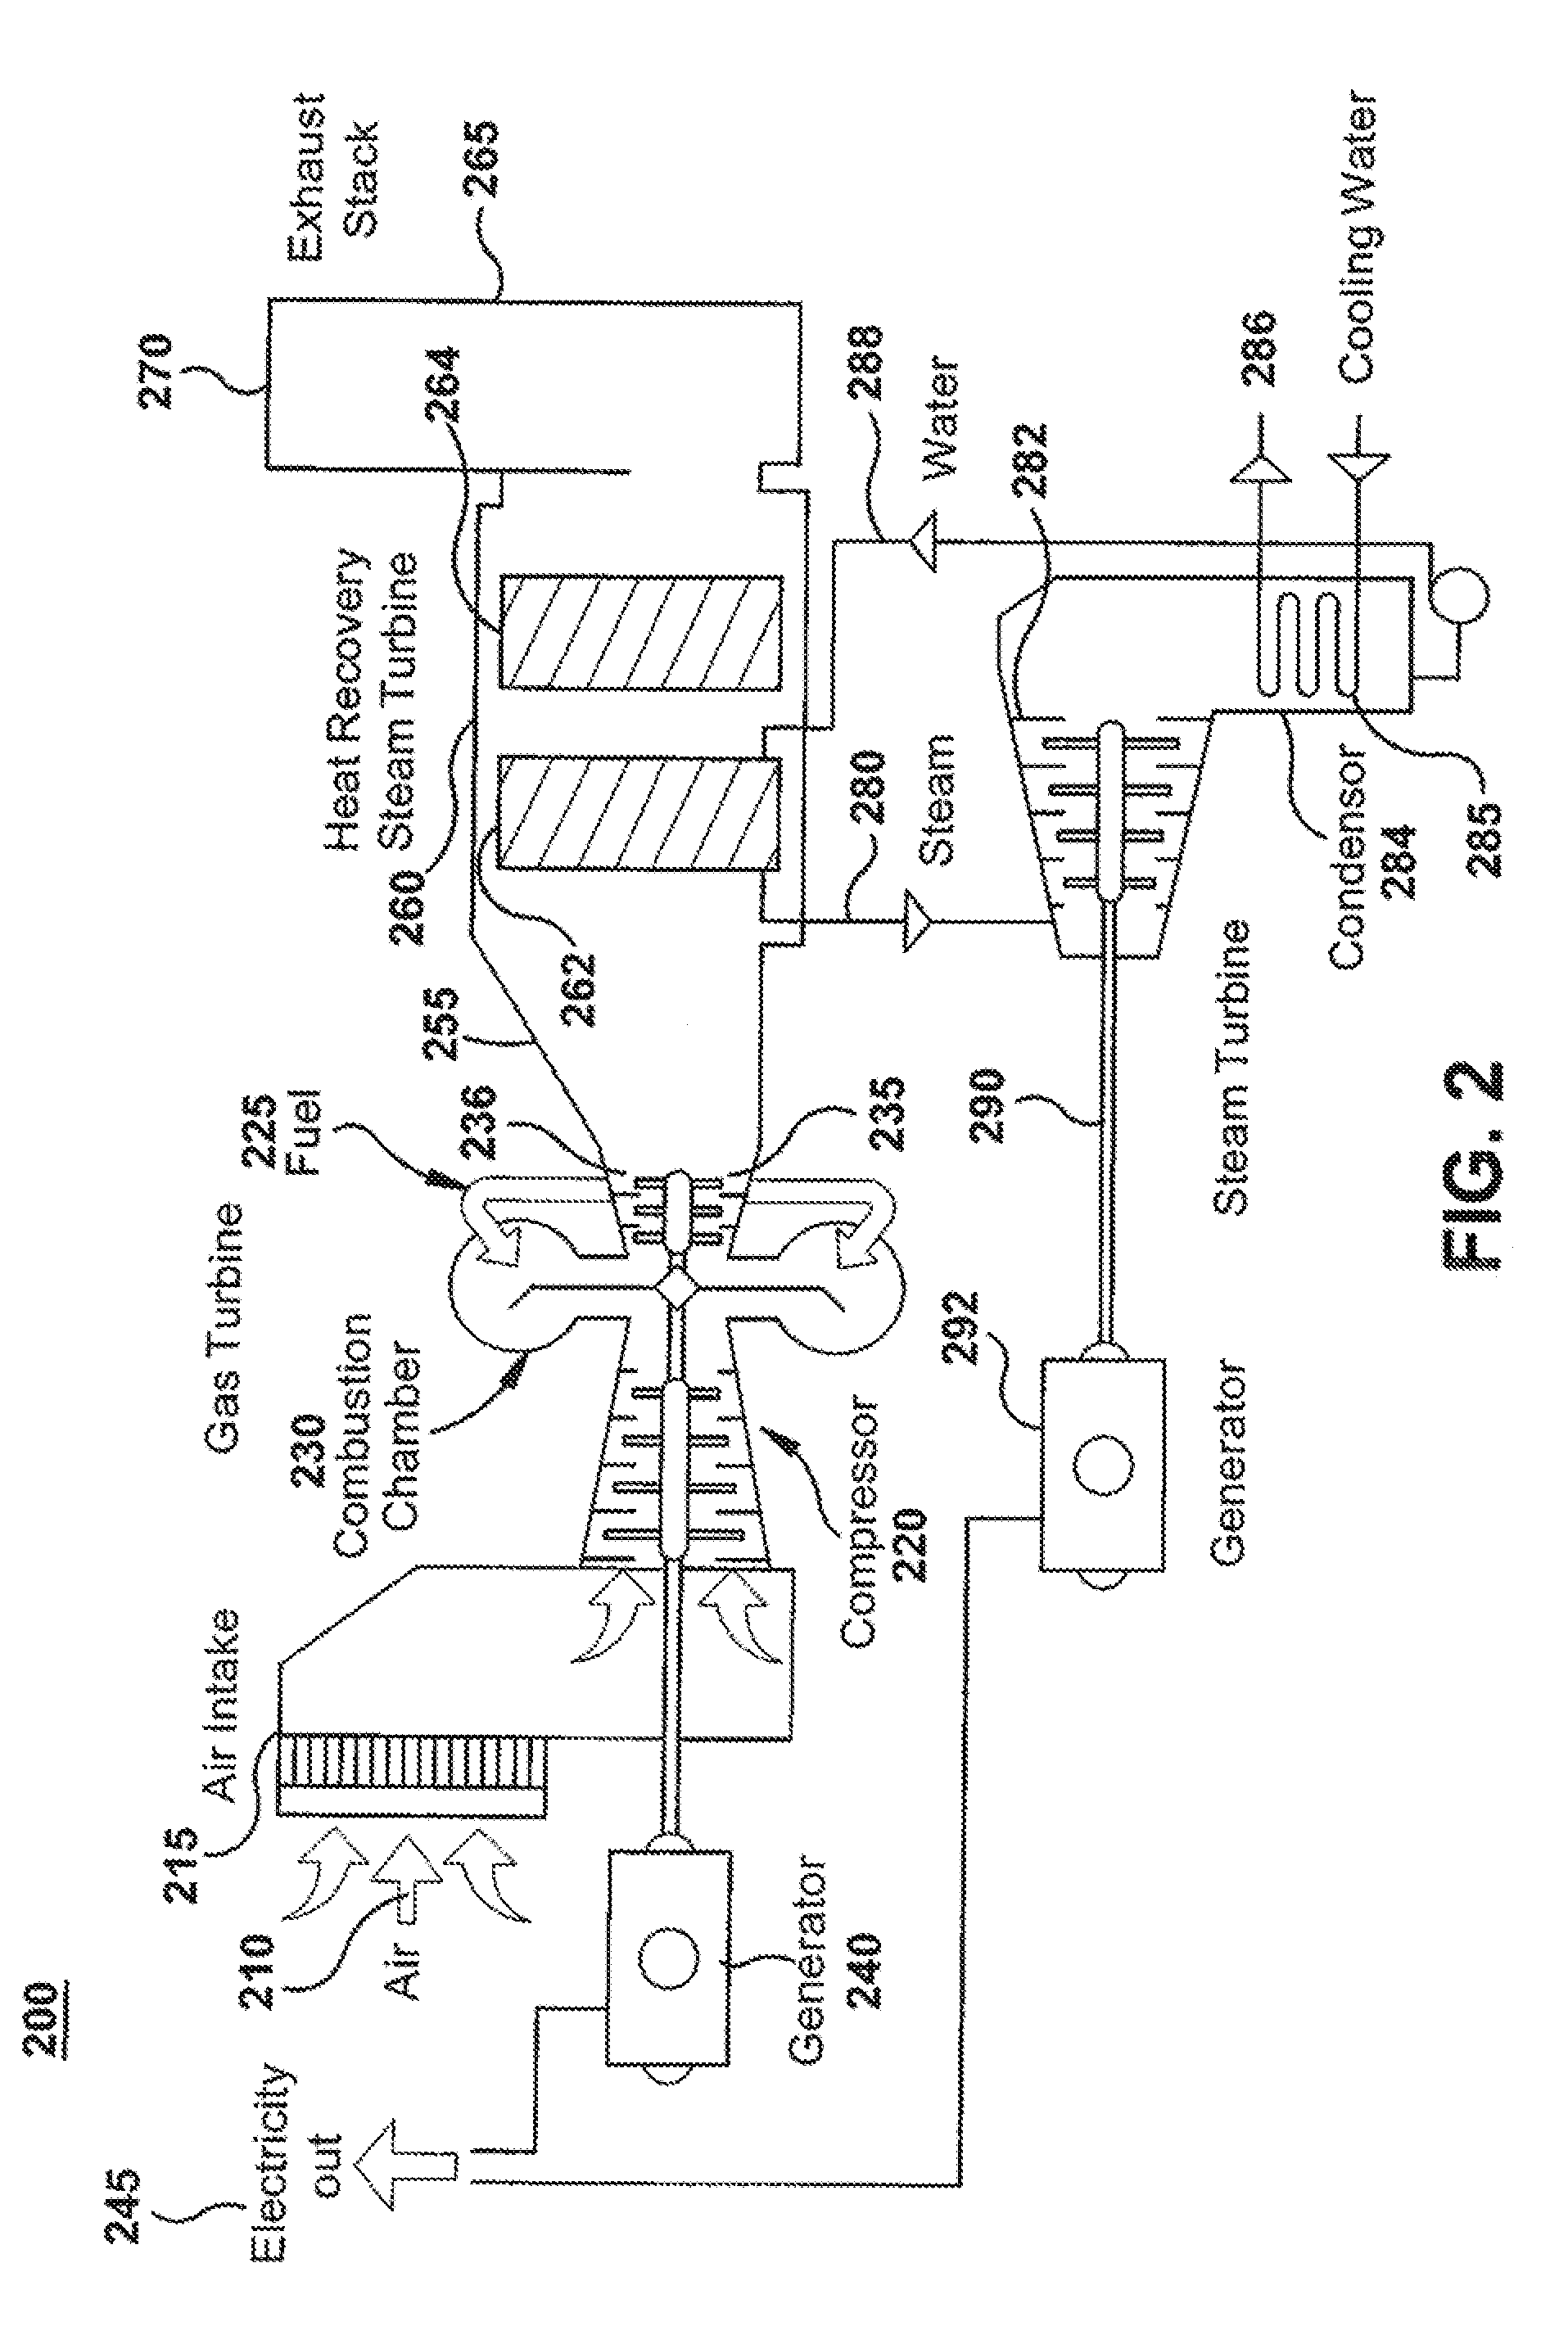 Method and apparatus for operation of co/voc oxidation catalyst to reduce no2 formation for gas turbine